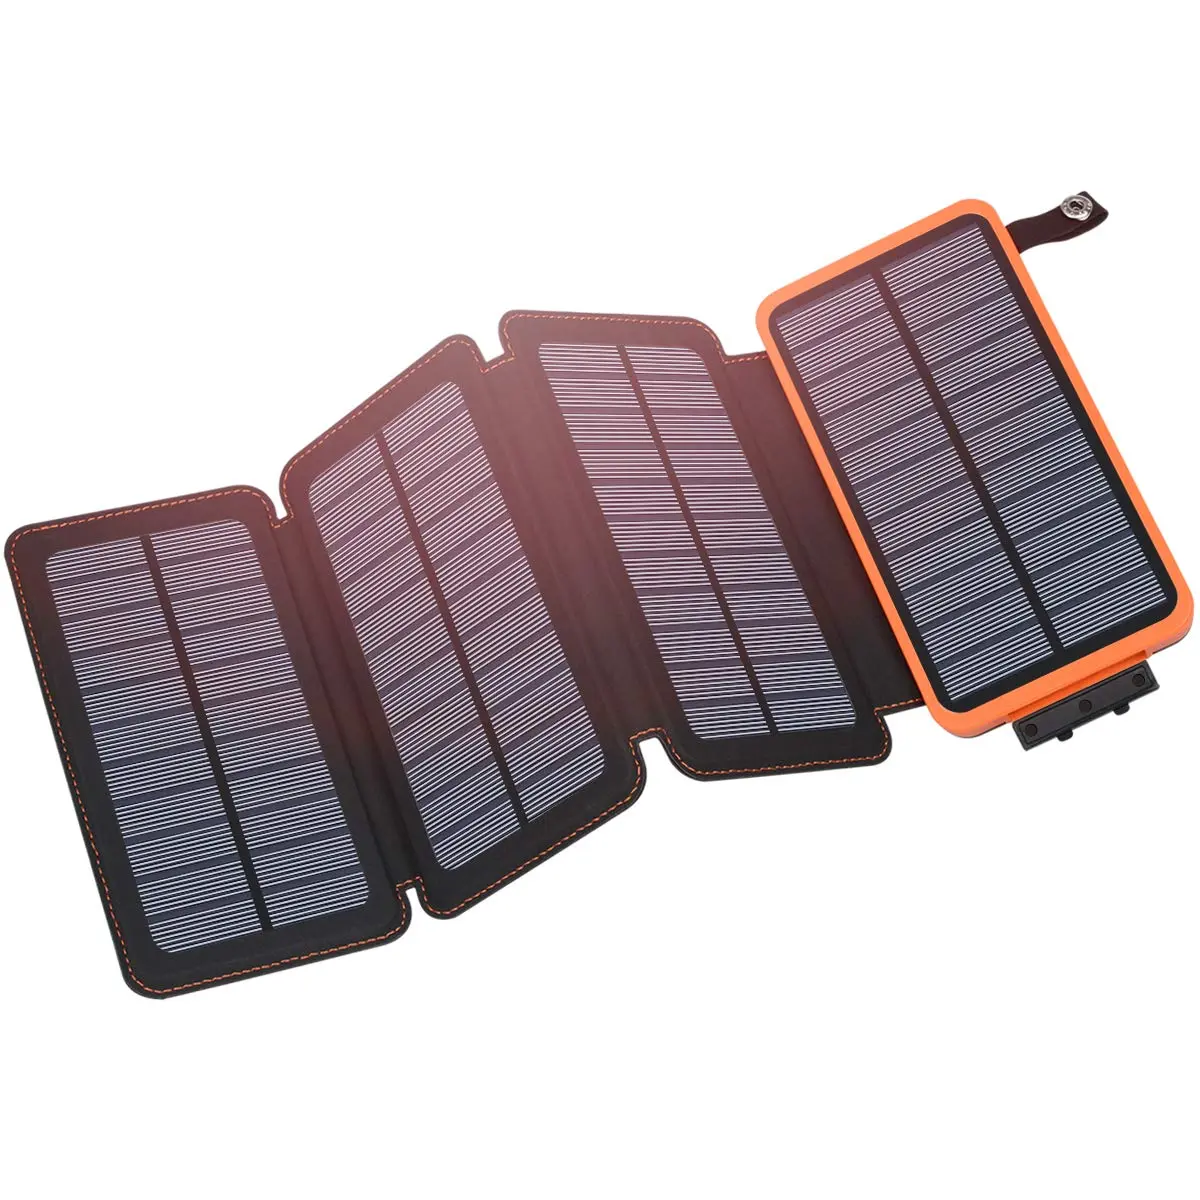 charging power bank with solar panel - Will a solar panel charge a power bank